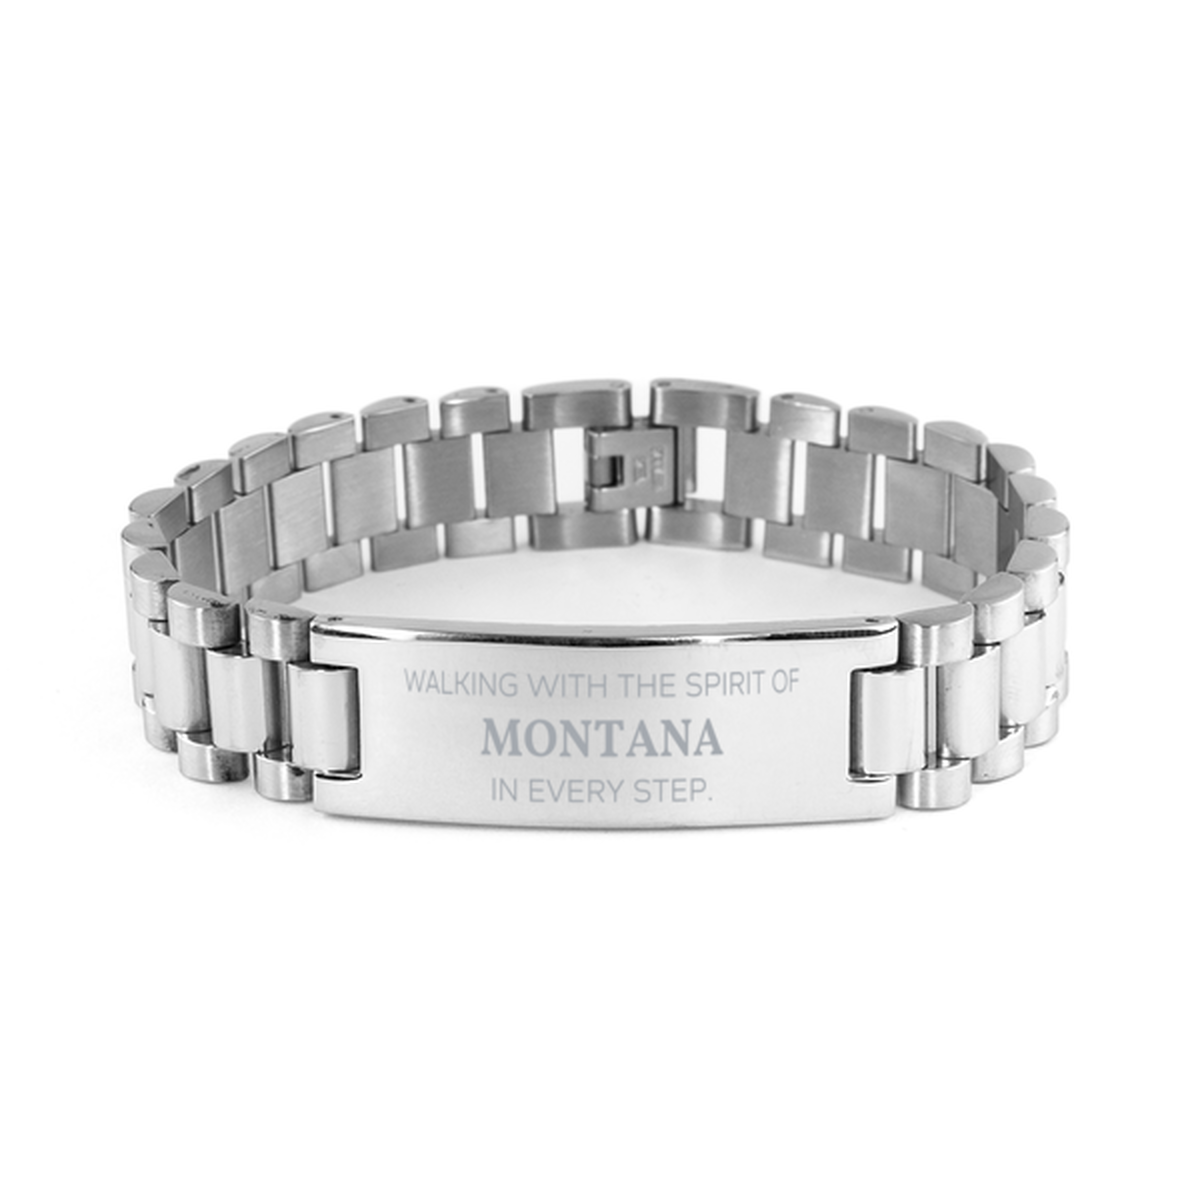 Montana Gifts, Walking with the spirit, Love Montana Birthday Christmas Ladder Stainless Steel Bracelet For Montana People, Men, Women, Friends